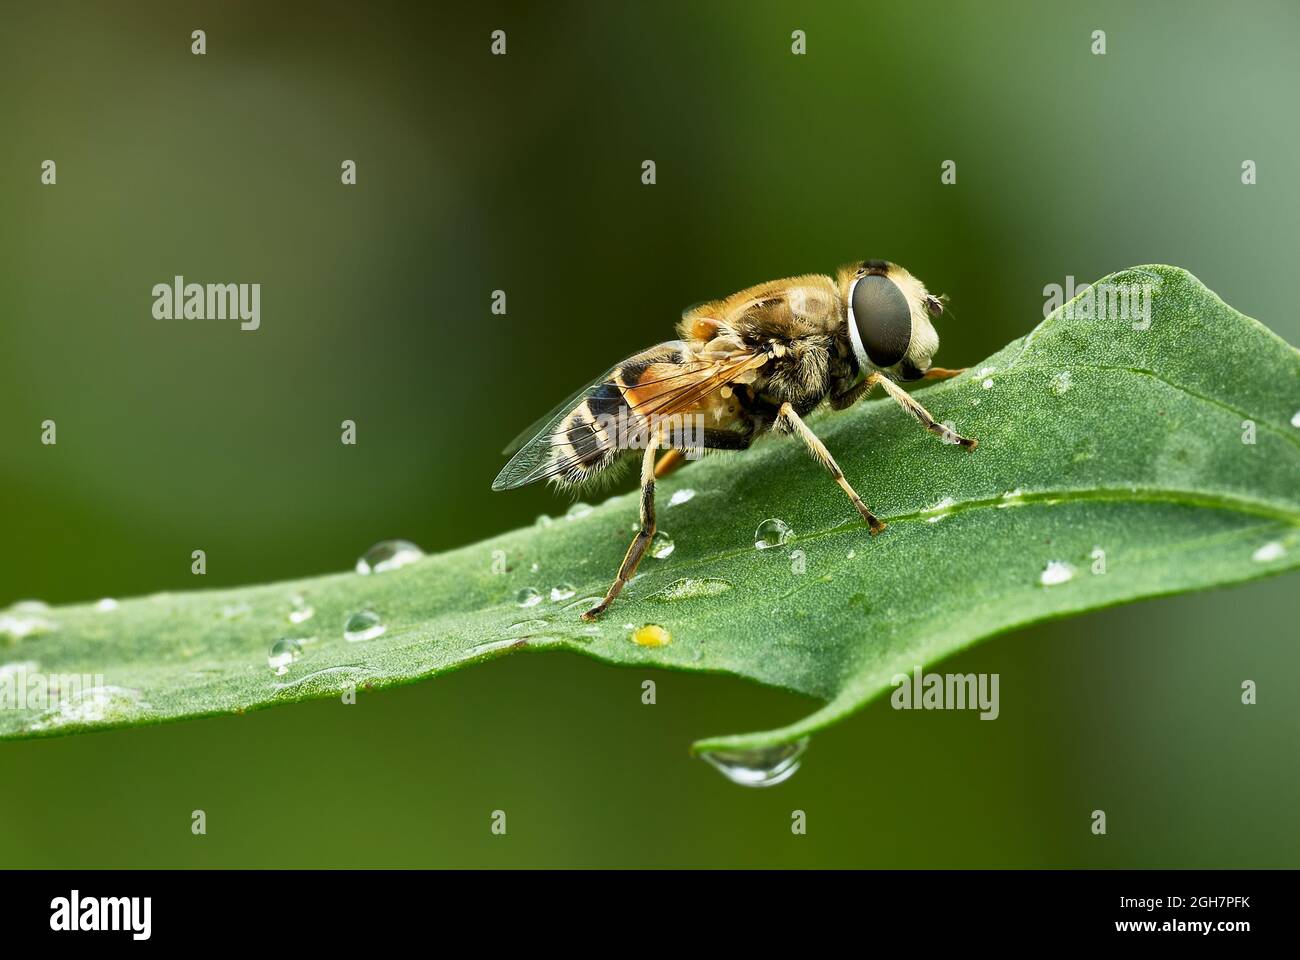 Common drone fly, closeup. Sitting on a leaf with water droplets after rain. Side view, Blurred natural green background. Genus Eristalix tenax. Stock Photo